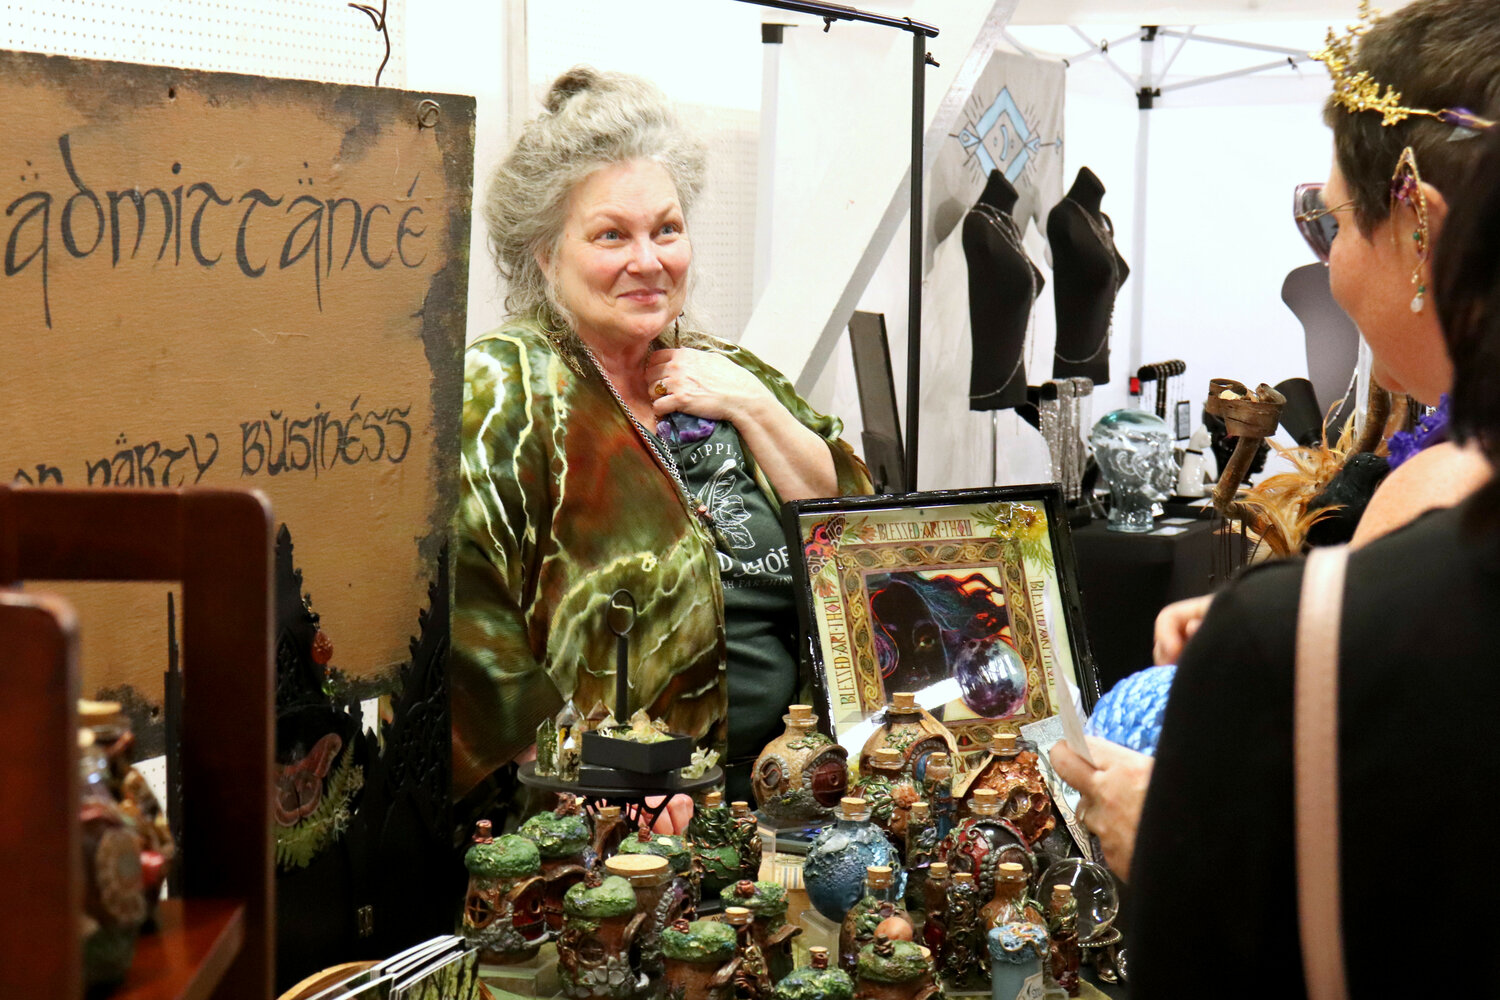 Catherine Jabusch talks to a potential customer at a booth for her business, The Woodland Wandolier, at the Southwest Washington Fairgrounds in Chehalis during the Centralia Fantasy Festival on Saturday, May 27.